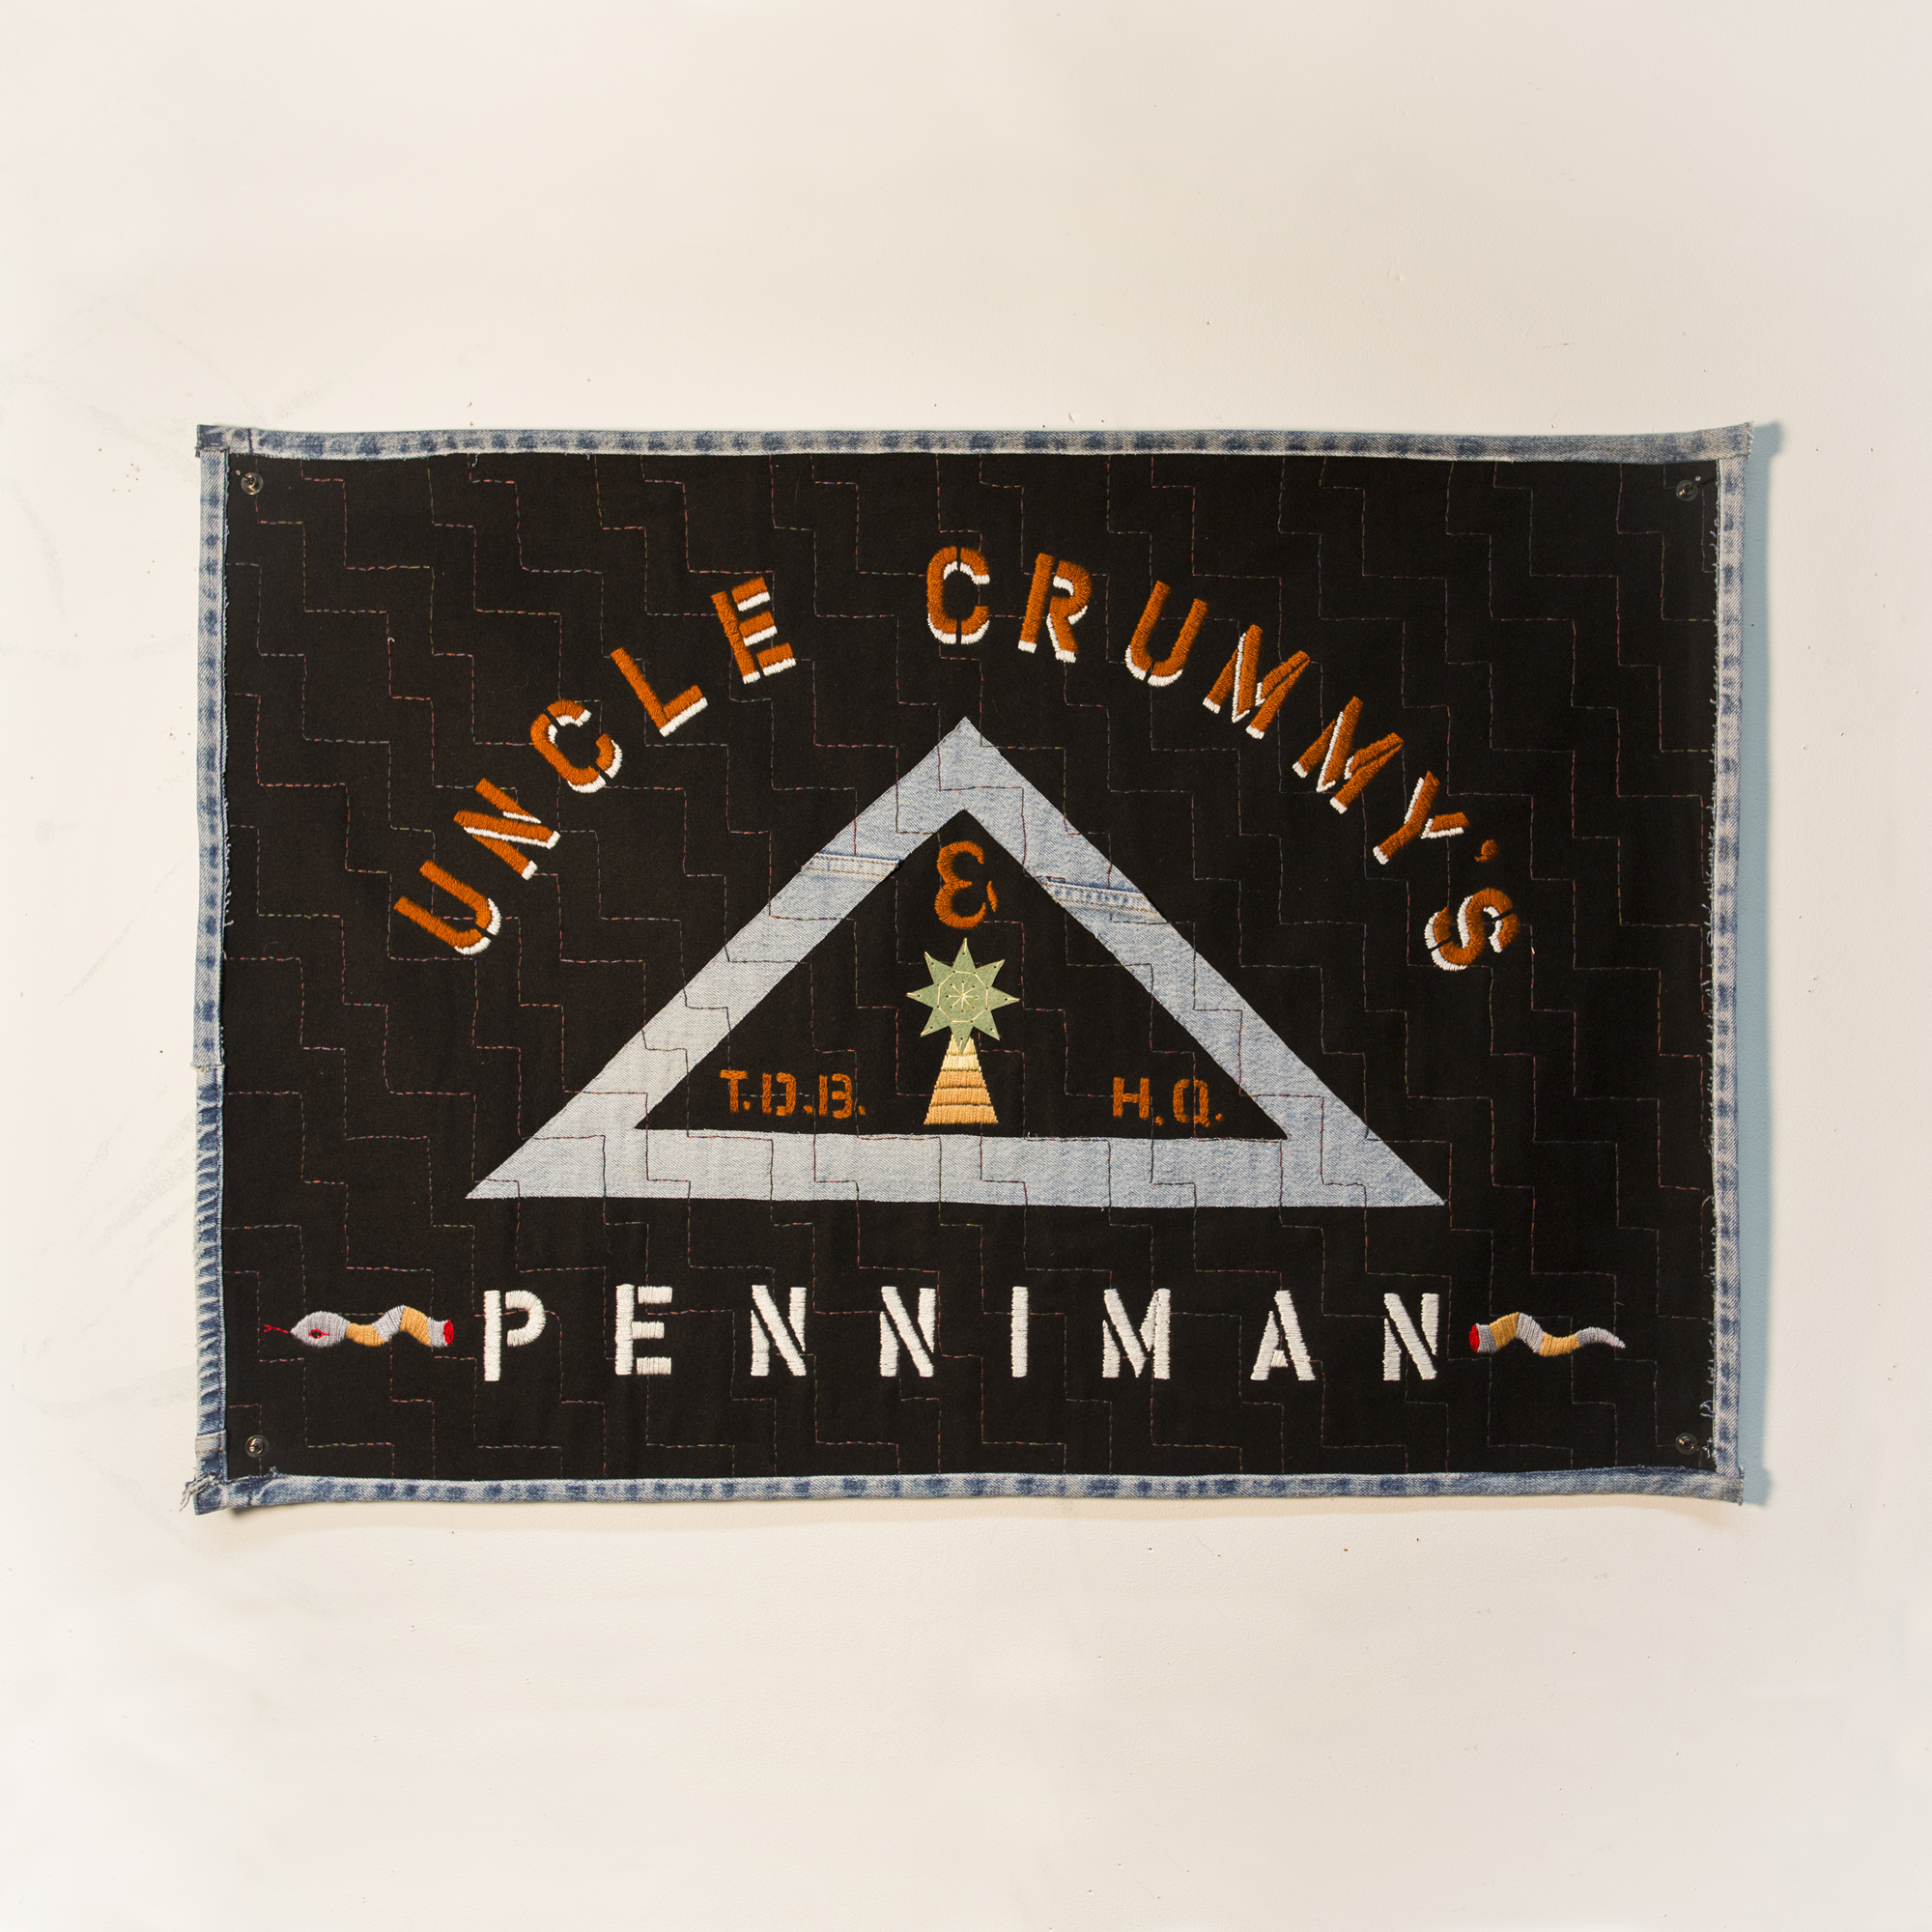 Uncle Crummy's on Penniman